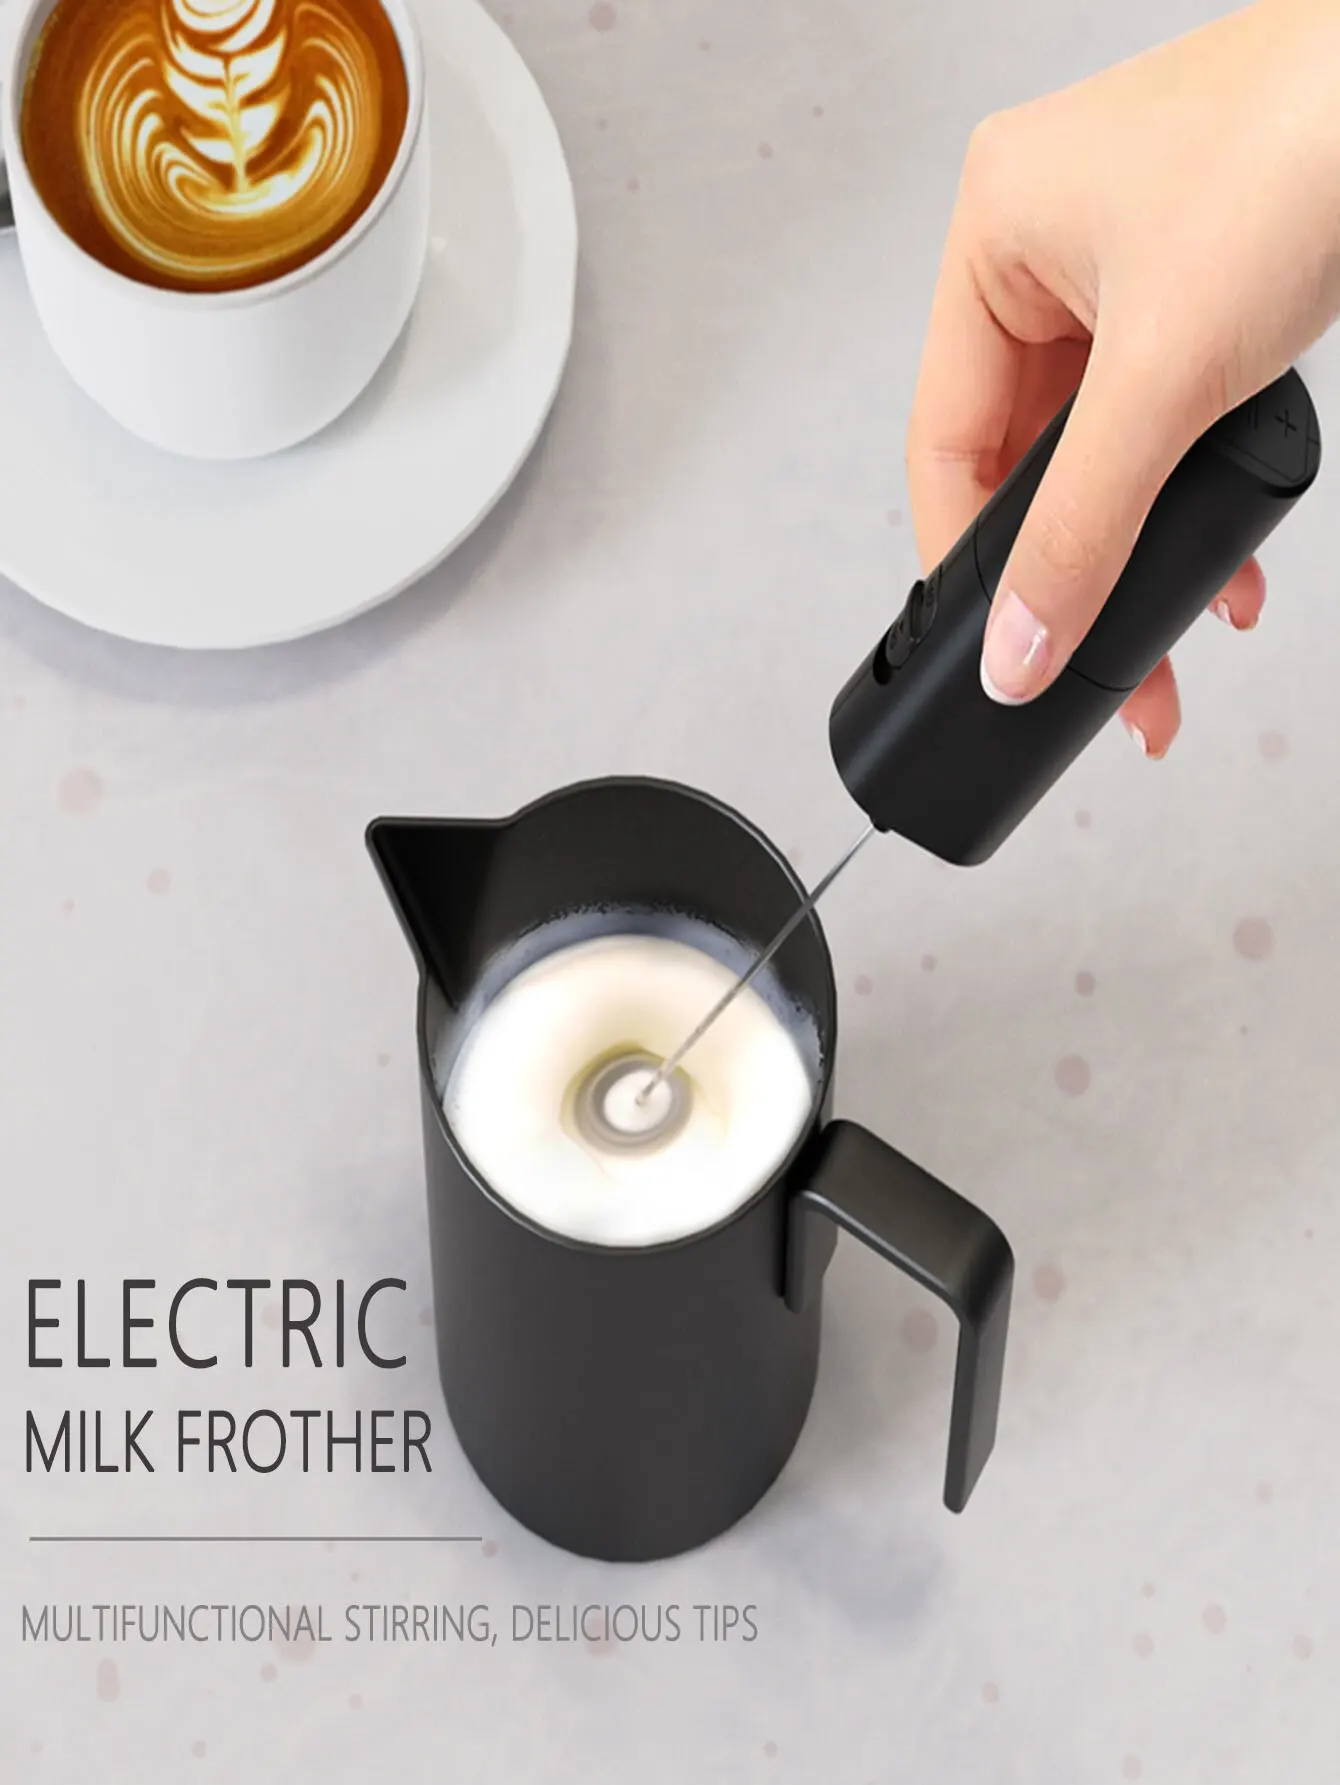 Generic Wireless Milk Frother Handheld Foam Maker for Lattes Coffee Whisk  Mixer Foamer for Cappuccino Matcha Frothing Wand Black @ Best Price Online